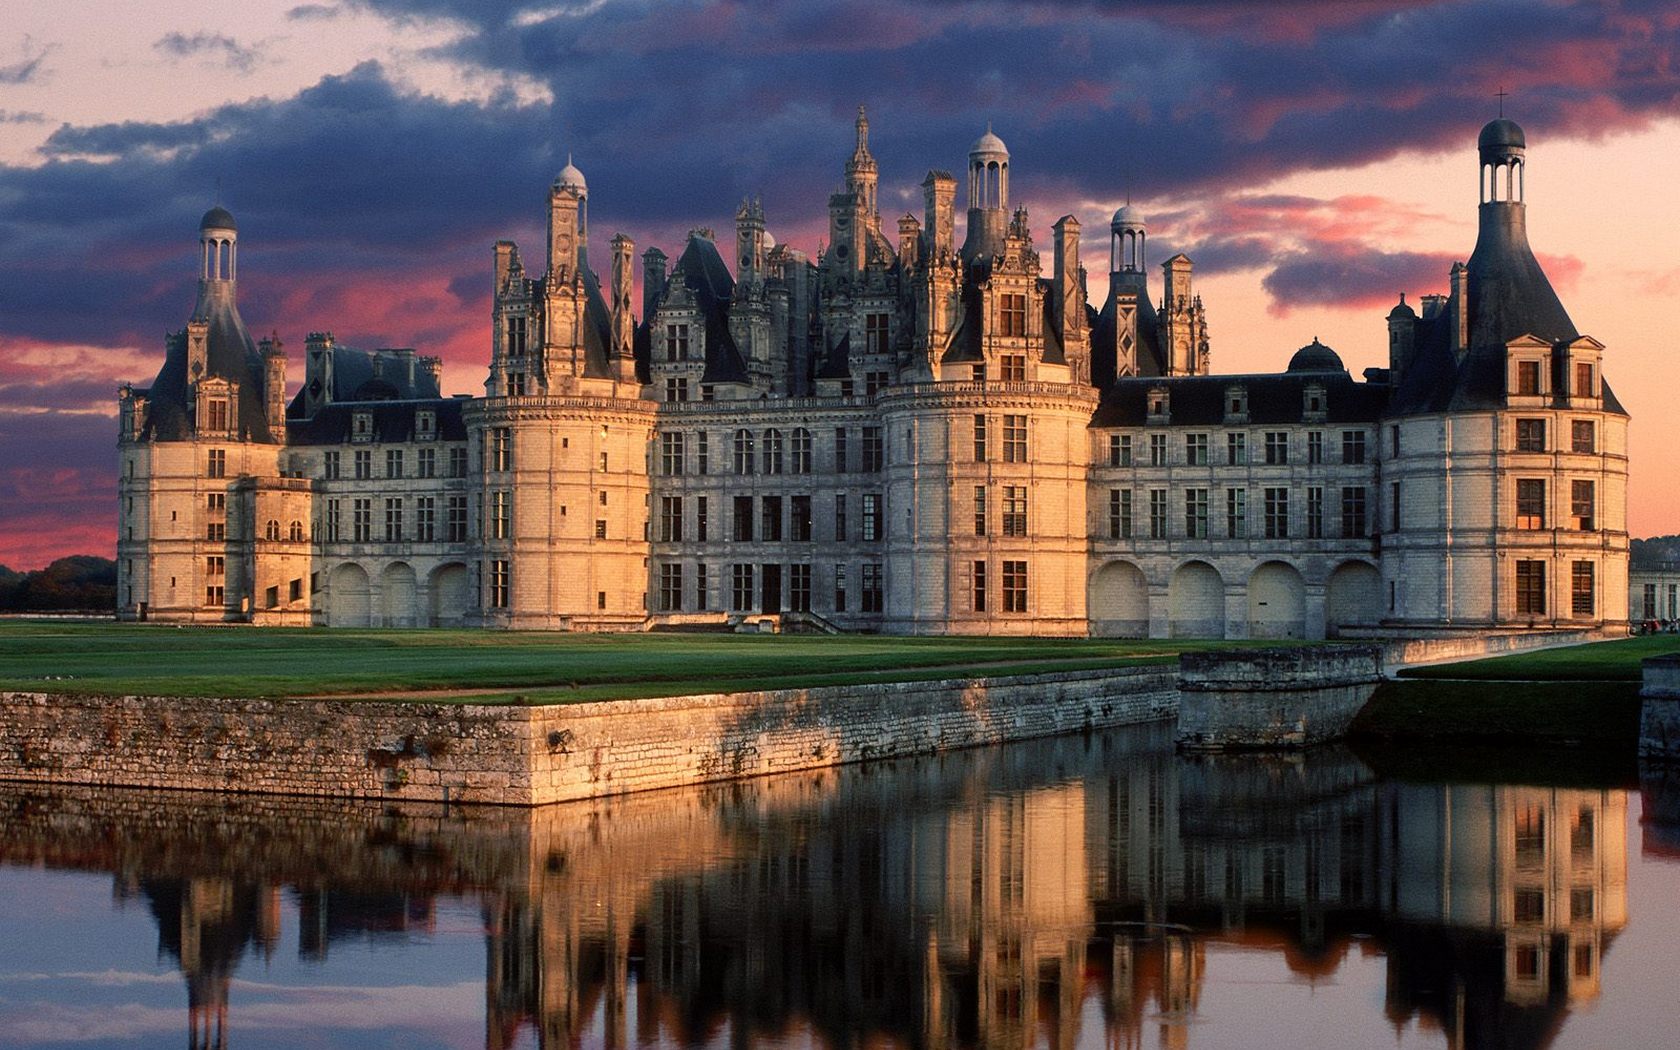 Download full size Chateau of Chambord, France Architecture wallpaper / 1680x1050